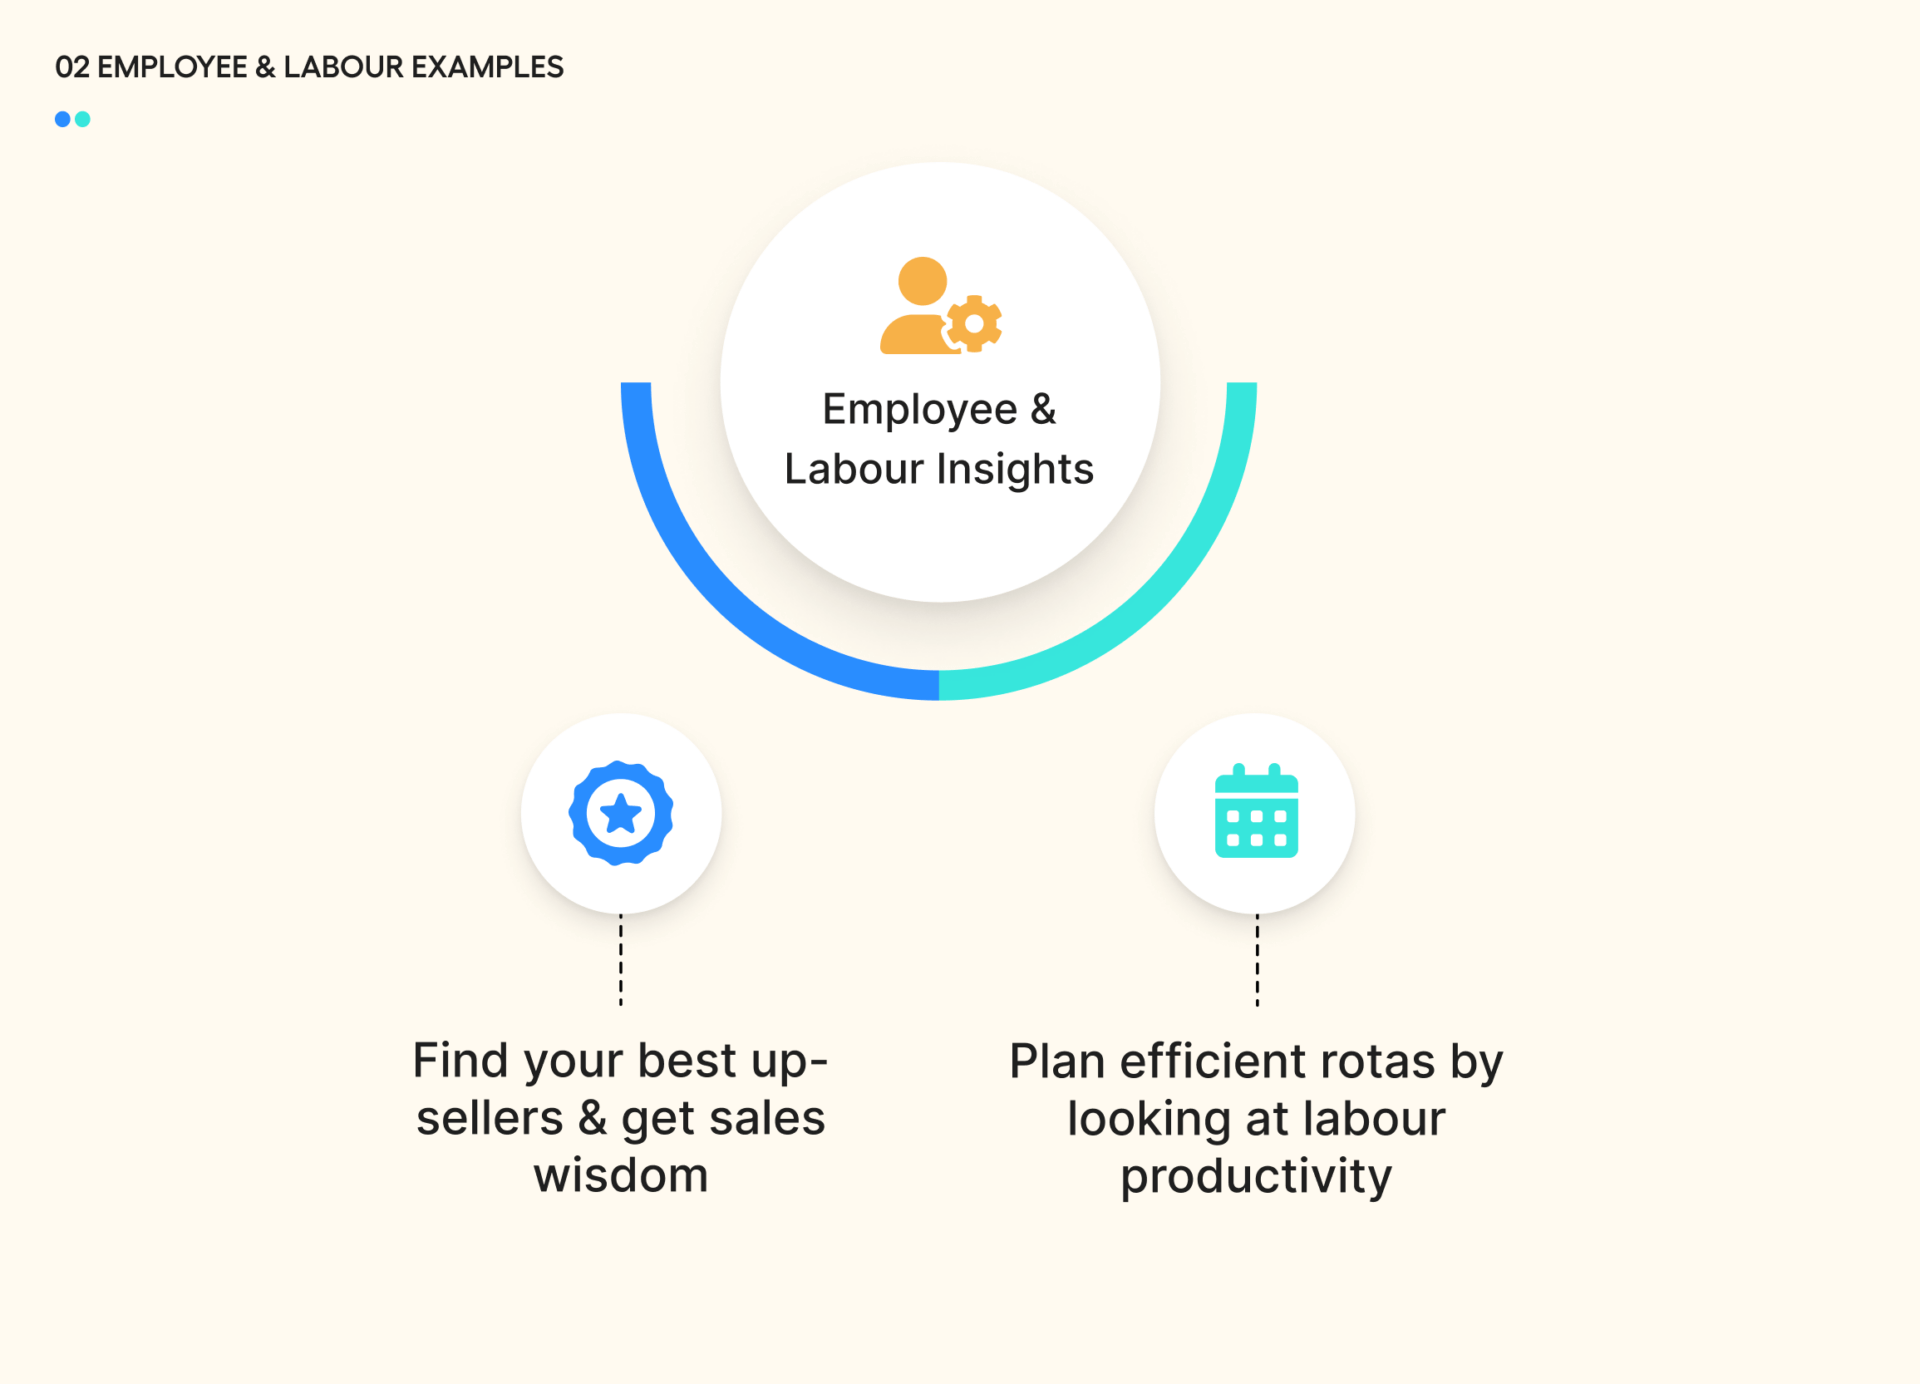 Employee & Labour Insights